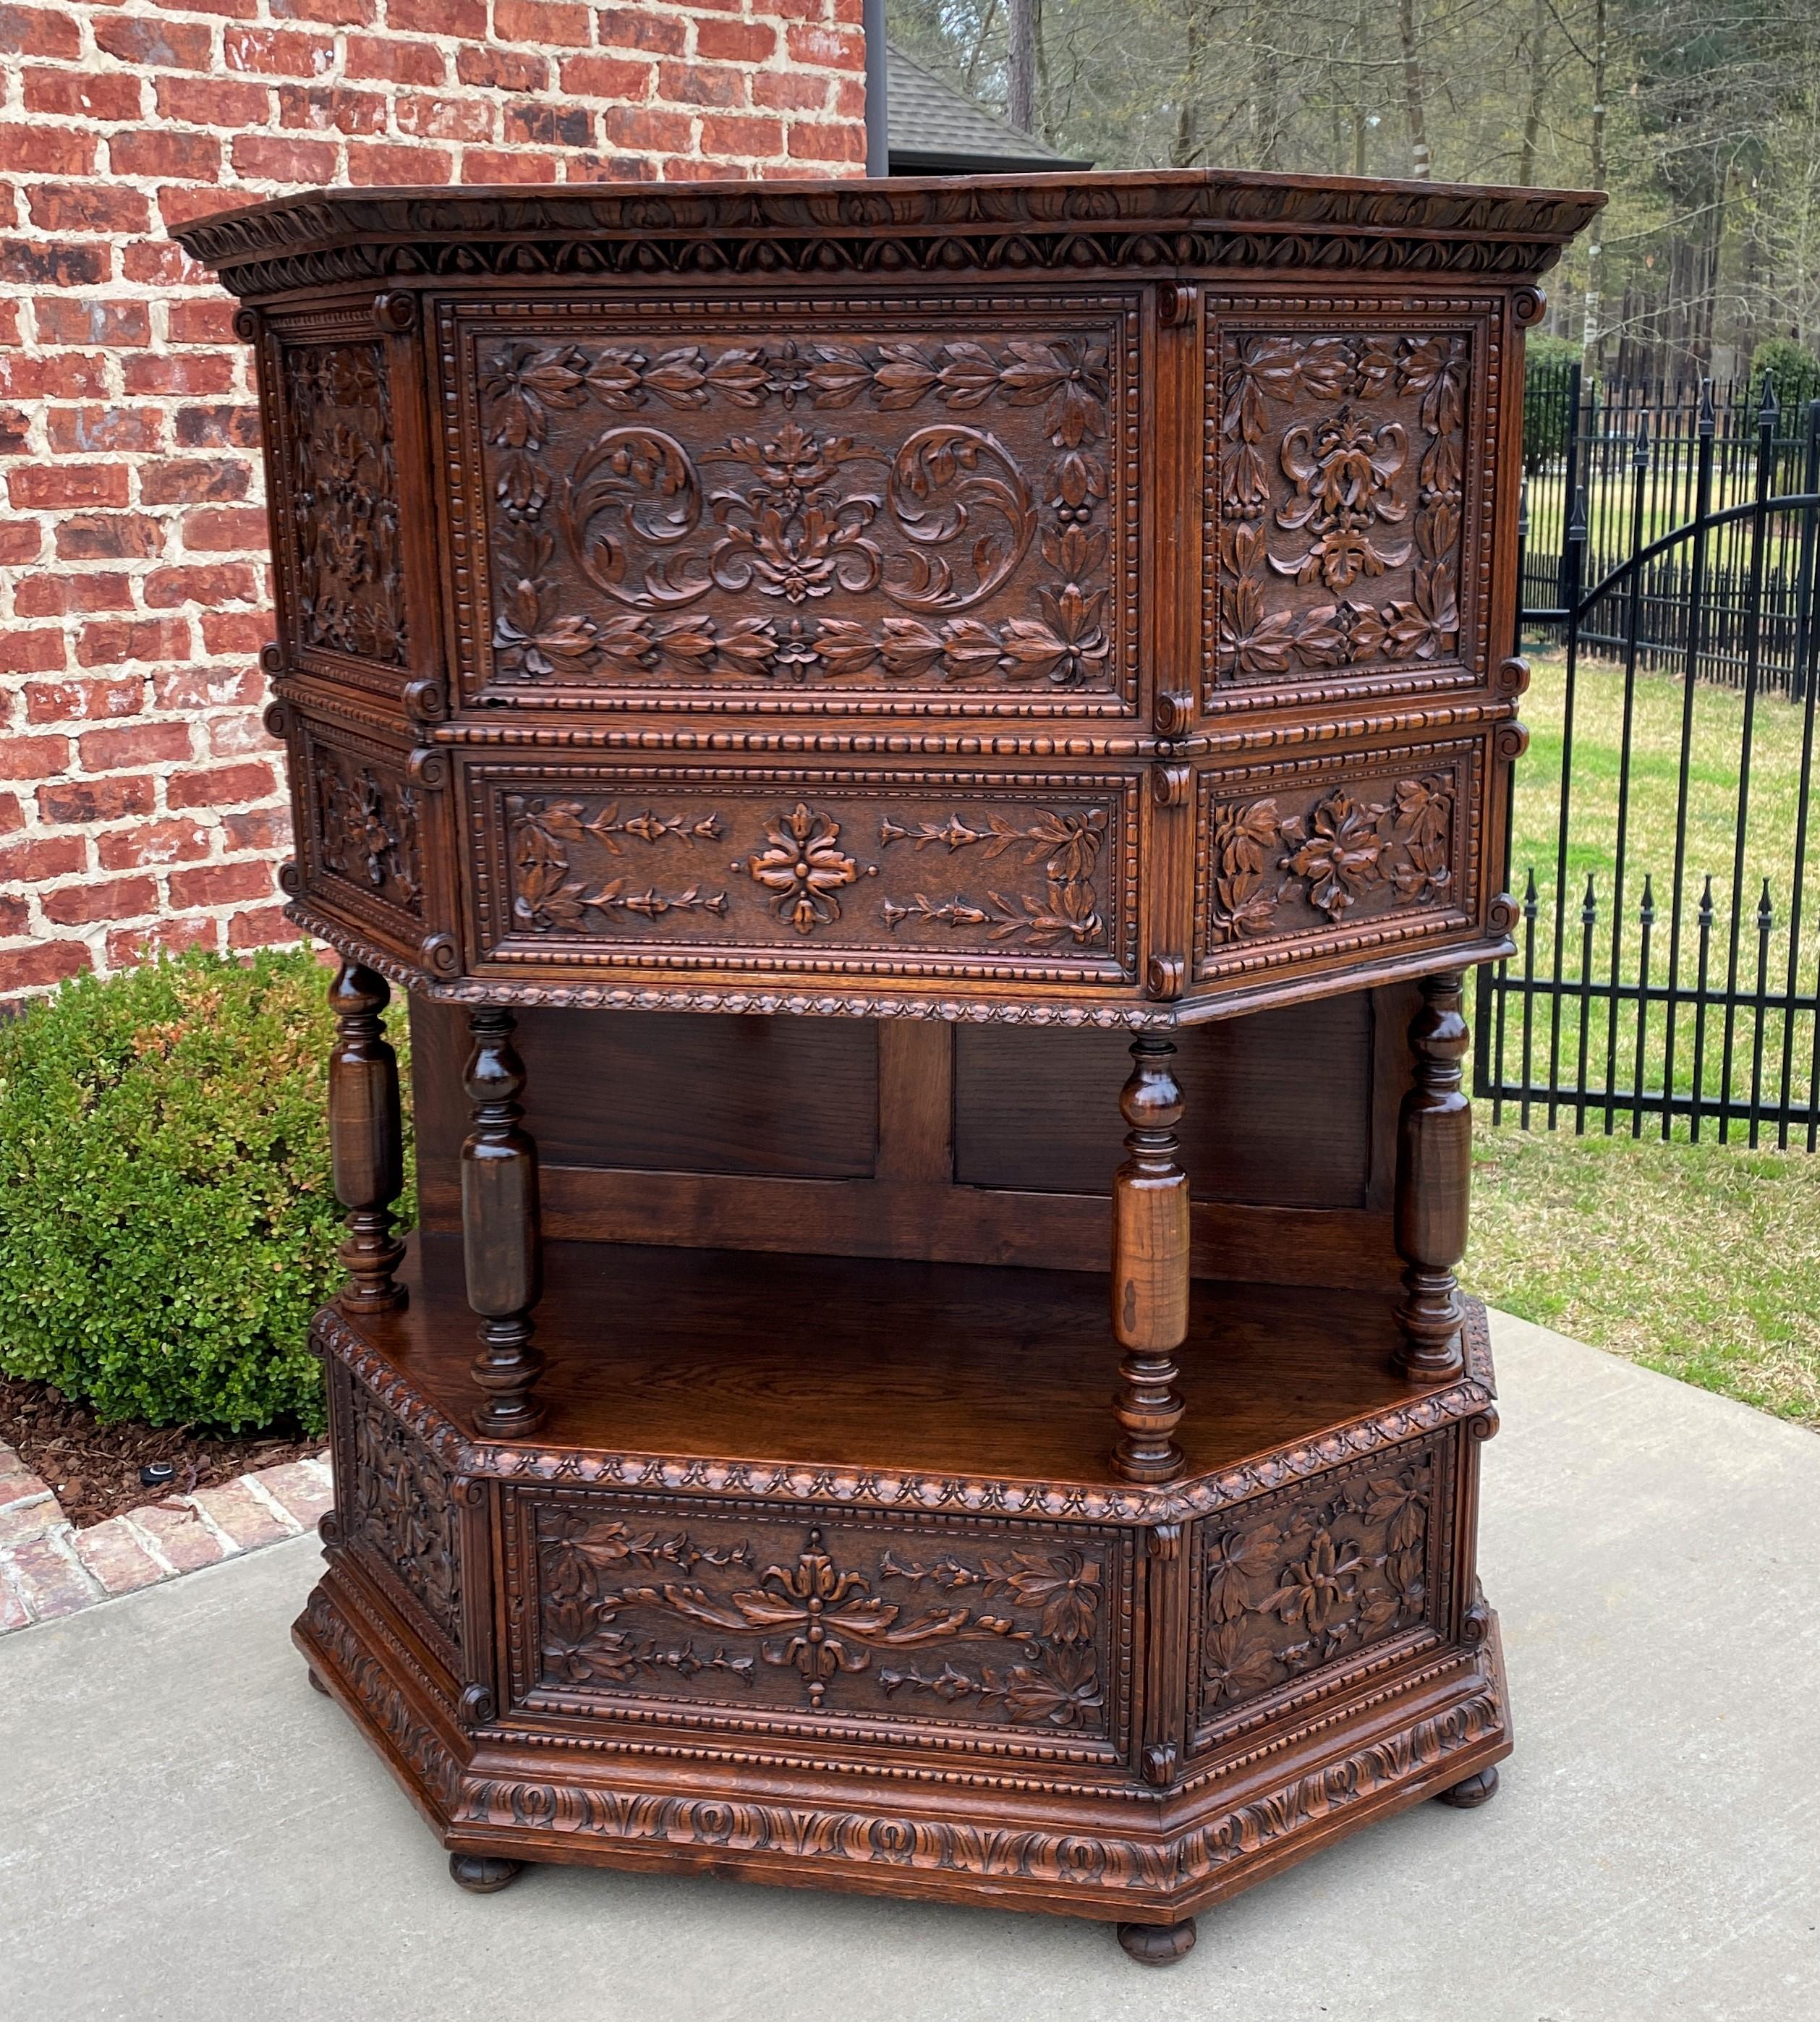 Antique French Carved Oak Gothic Sacristy Vestry Altar Wine Bar Cabinet~~c. 1880s 

In 18th and 19th century Europe, sacristy or vestment cabinets were used to store liturgical garments, robes, wine and other articles associated primarily with the